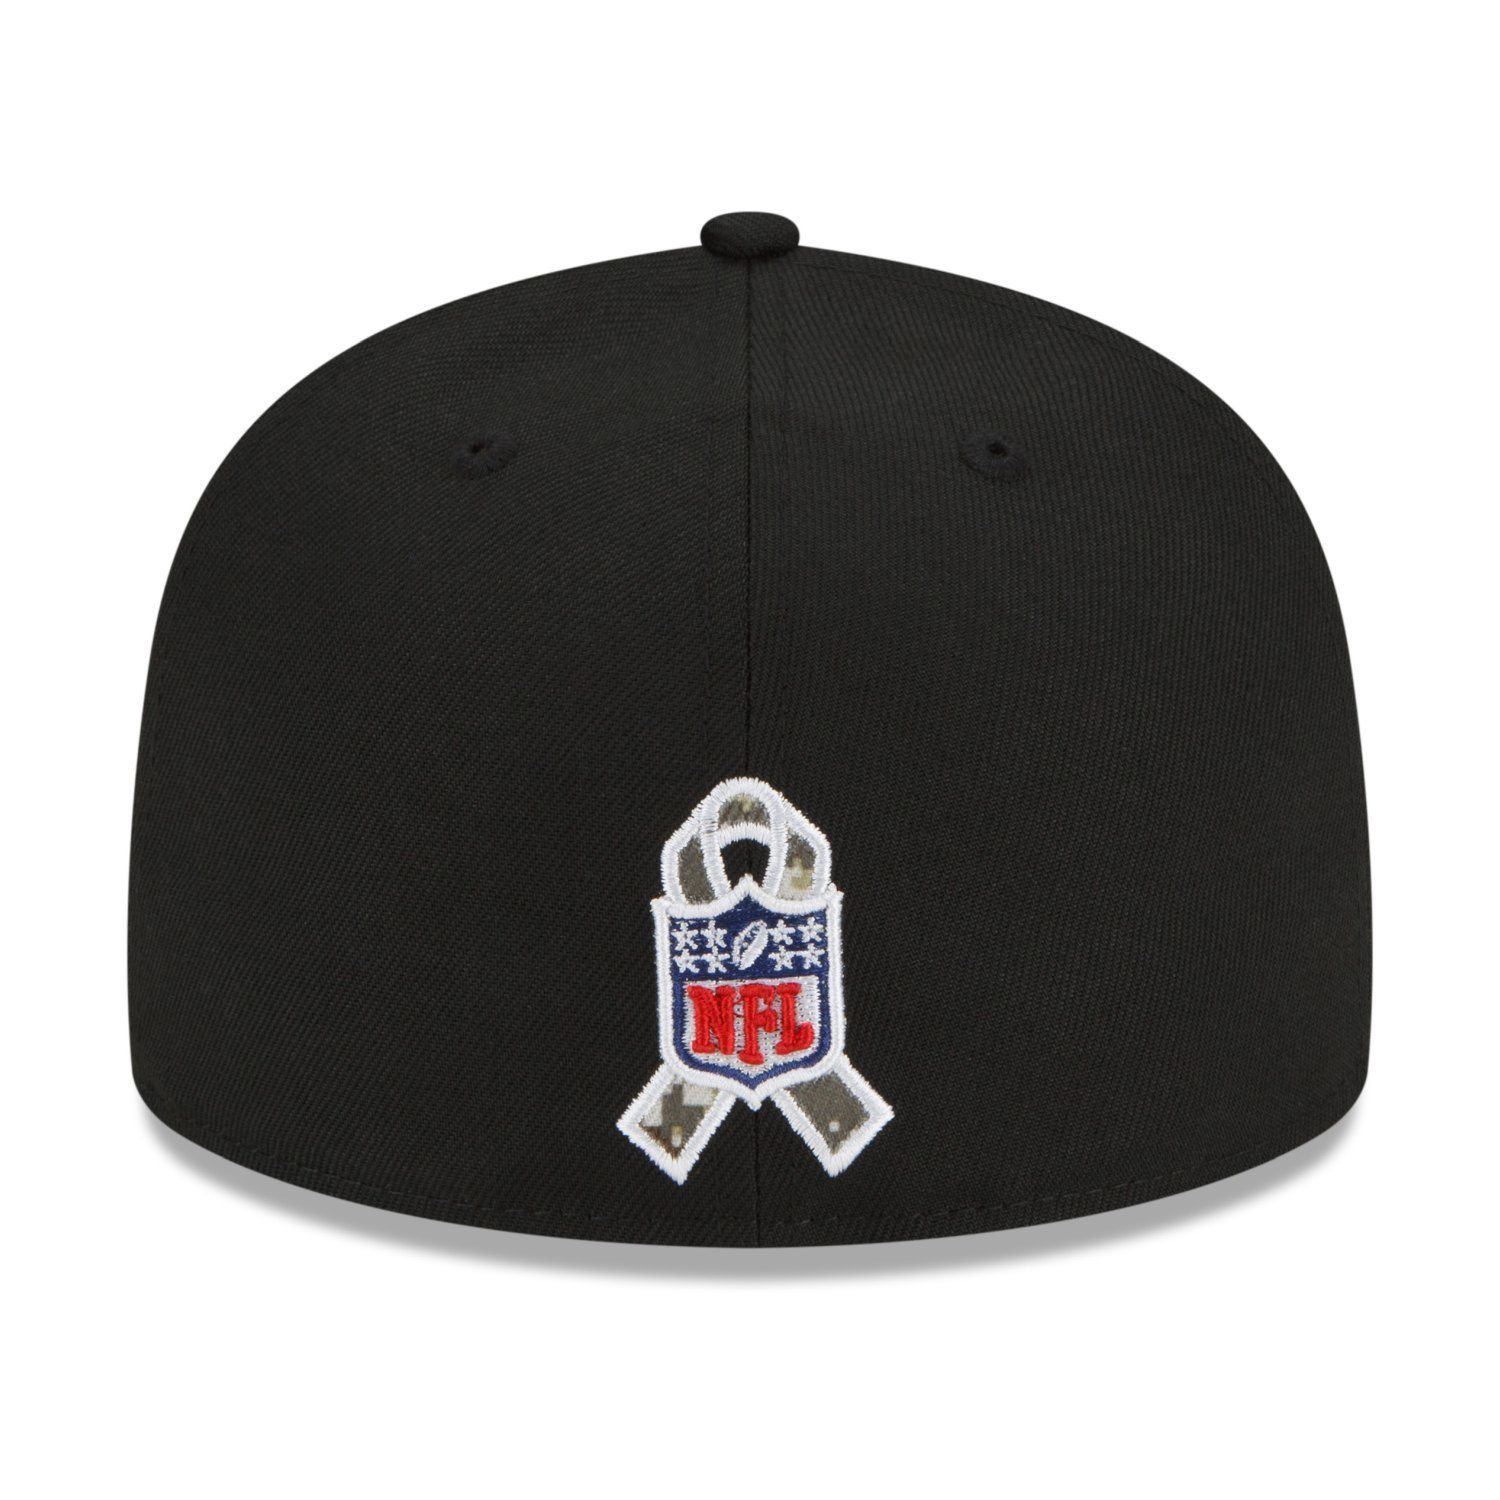 New 202122 59FIFTY Service Fitted to Salute NFL SHIELD NFL Era Cap